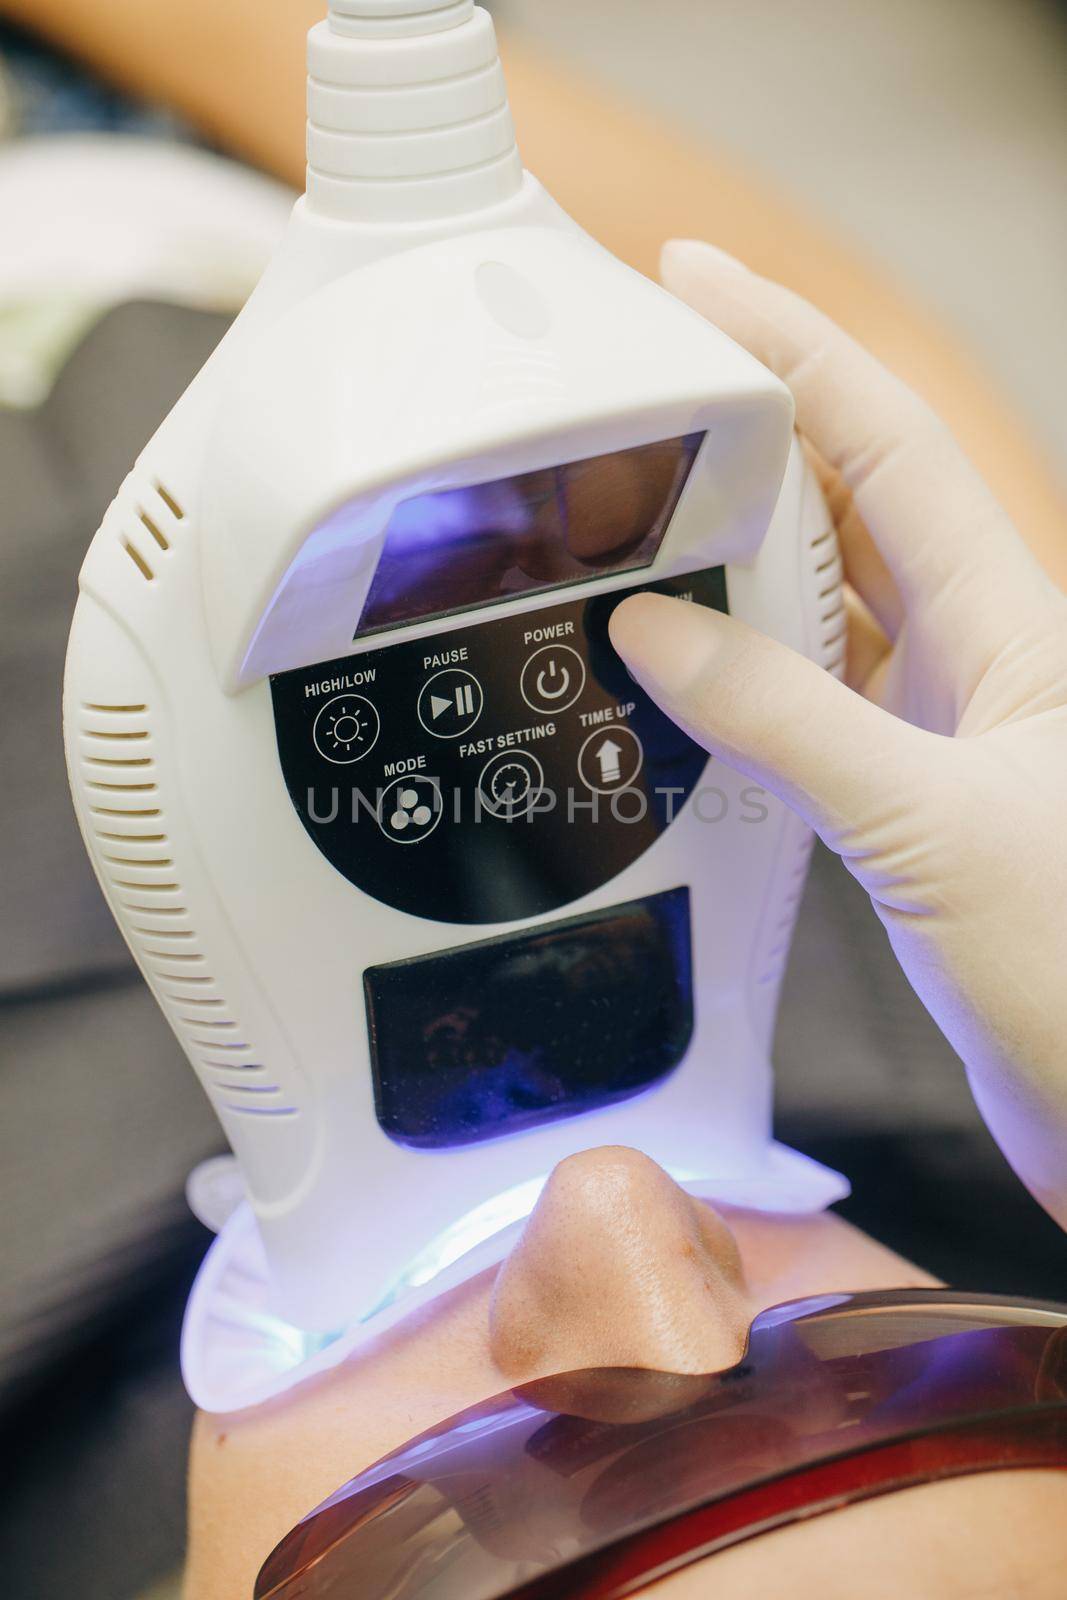 Teeth whitening using an ultraviolet lamp. Dentist doing teeth whitening procedure with ultraviolet lamp. Concept of teeth care and dentistry. by uflypro